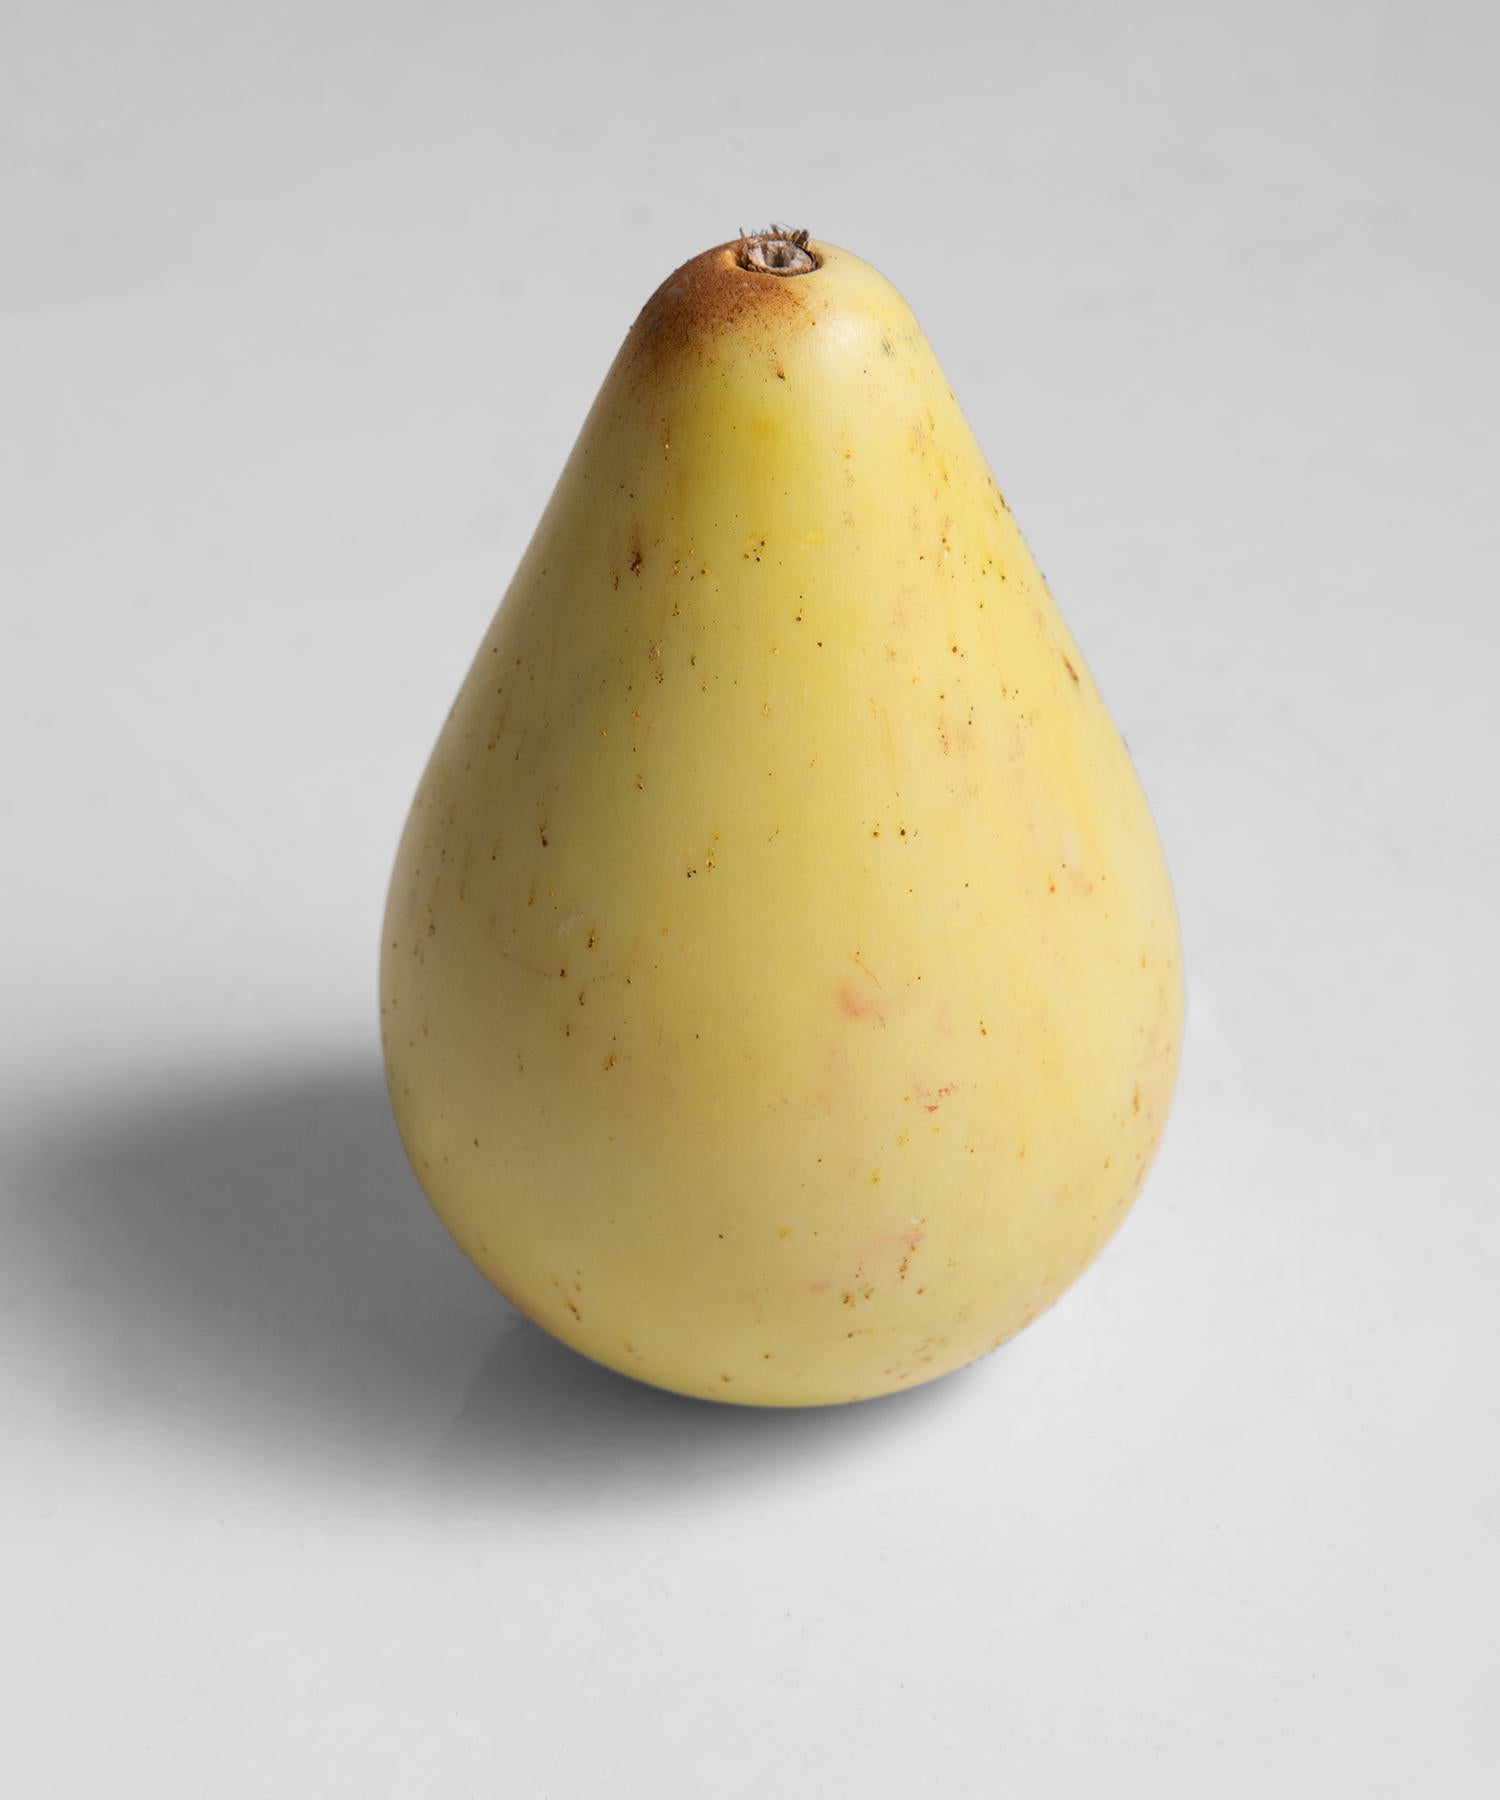 Hand-Painted Hand Painted Stone Pear, America circa 1960.